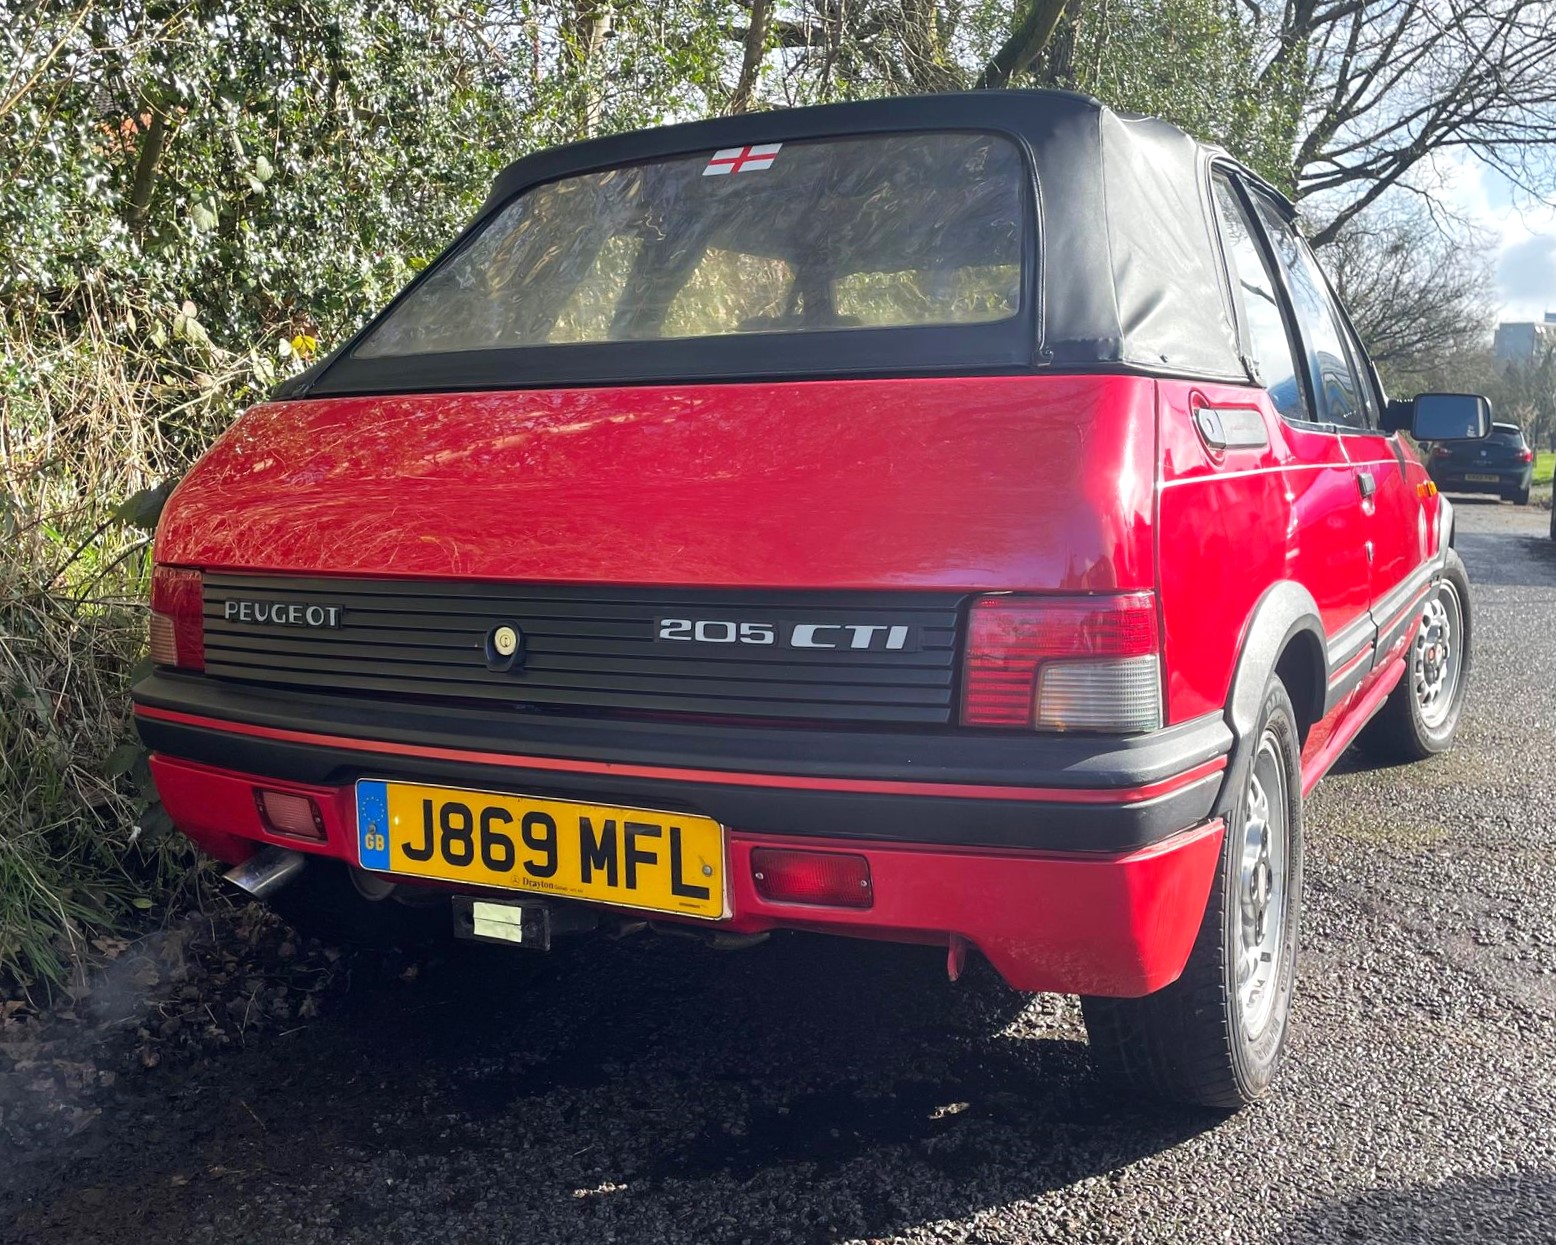 Peugeot 205 Cti 1.6 convertible - Mot'd 83,000 miles This stunning low mileage car has been - Image 6 of 18